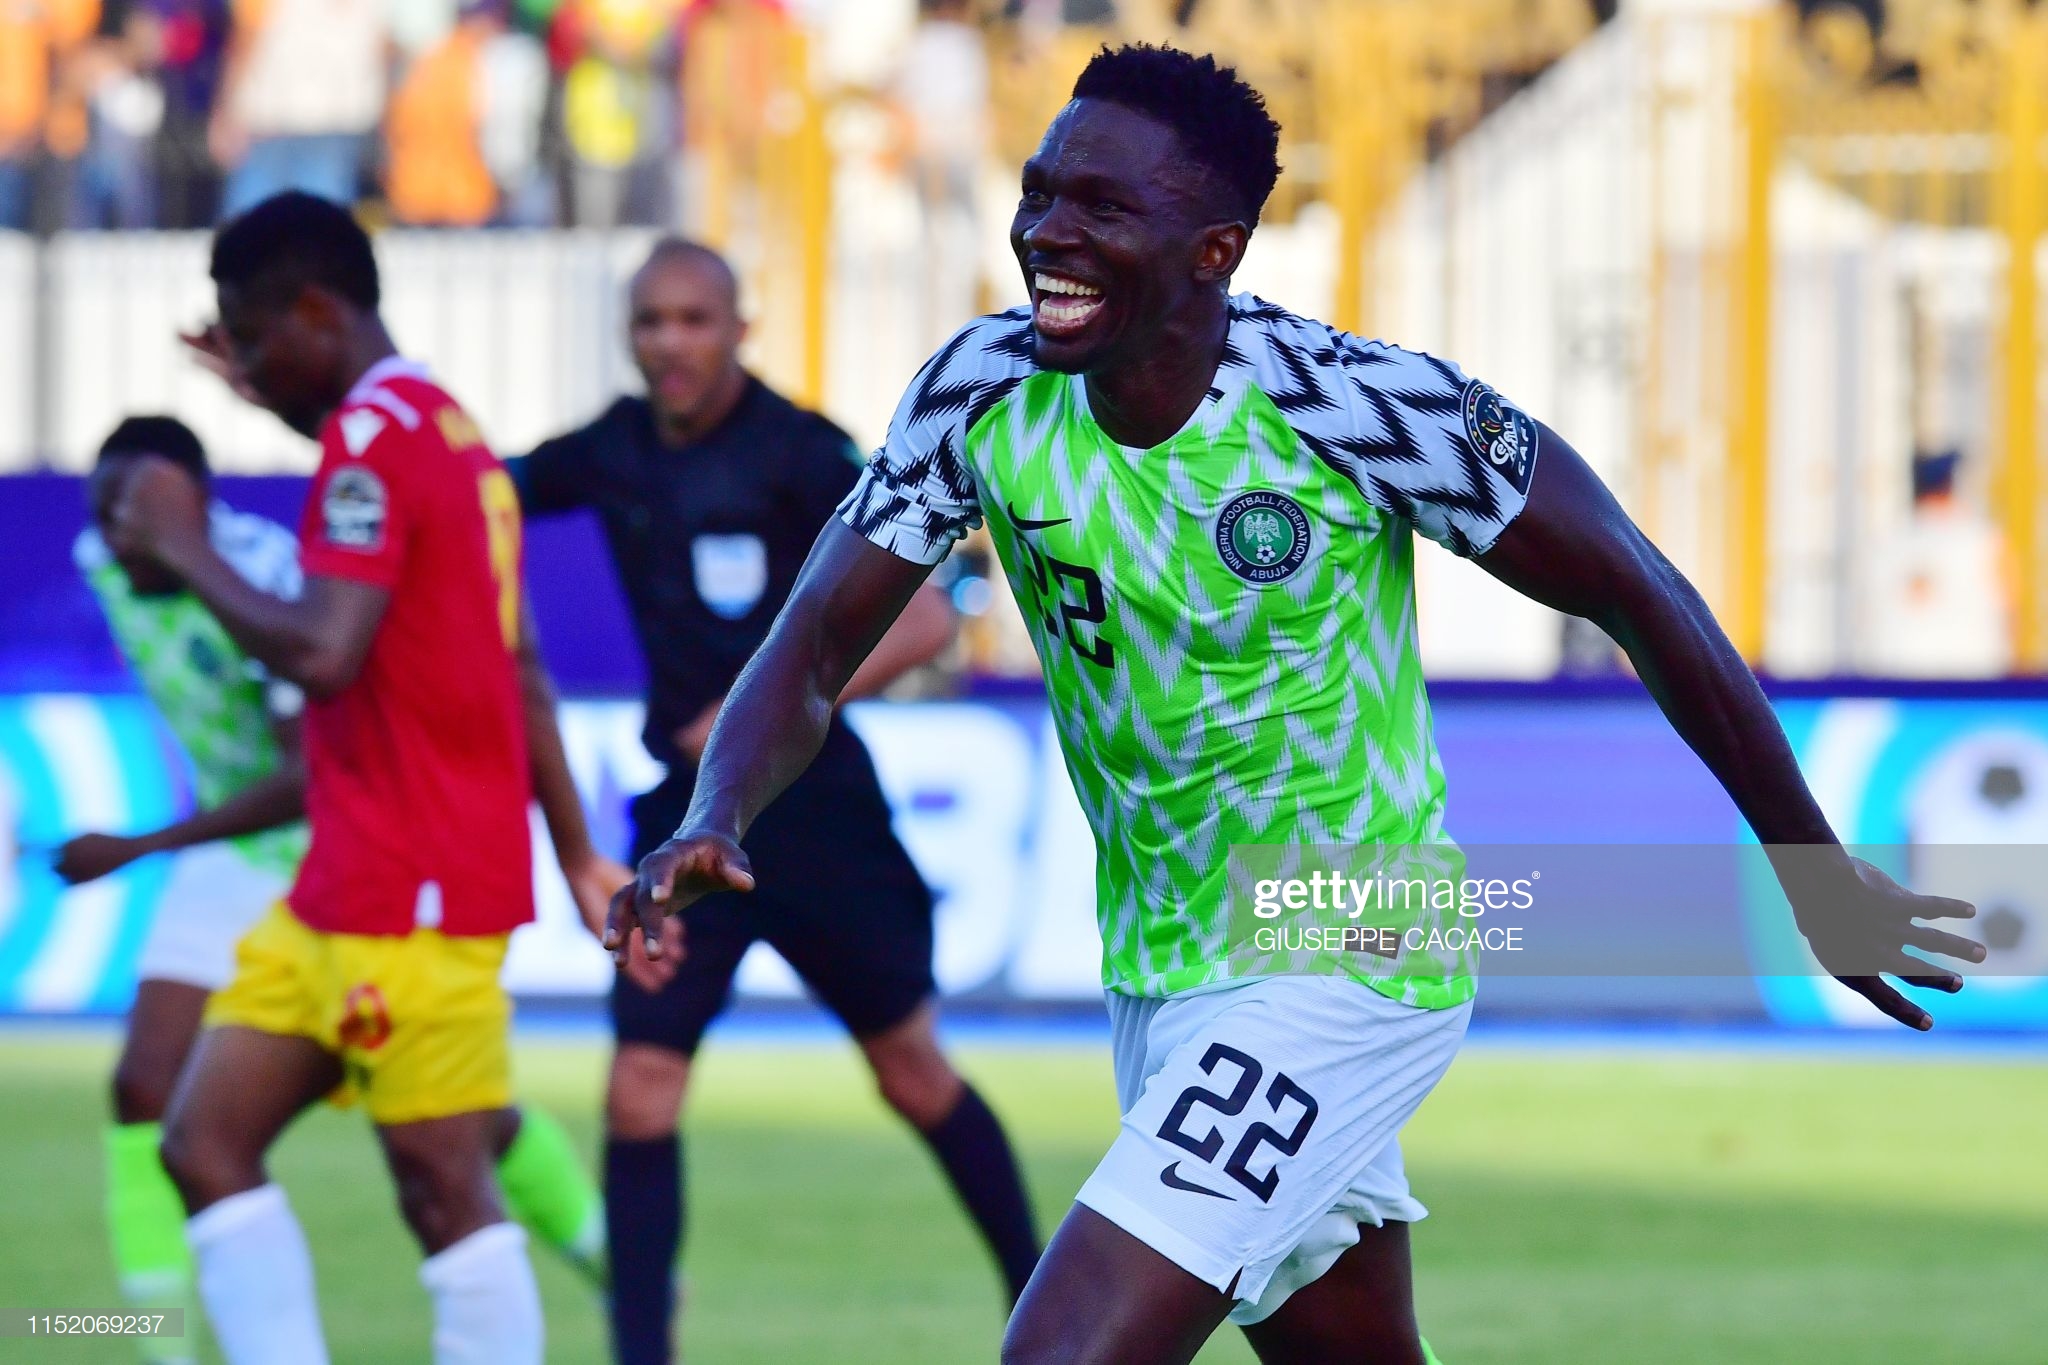 Kenneth Omeruo was Man of the Match after his dominant performance against Guinea  (GIUSEPPE CACACE/AFP/Getty Images)